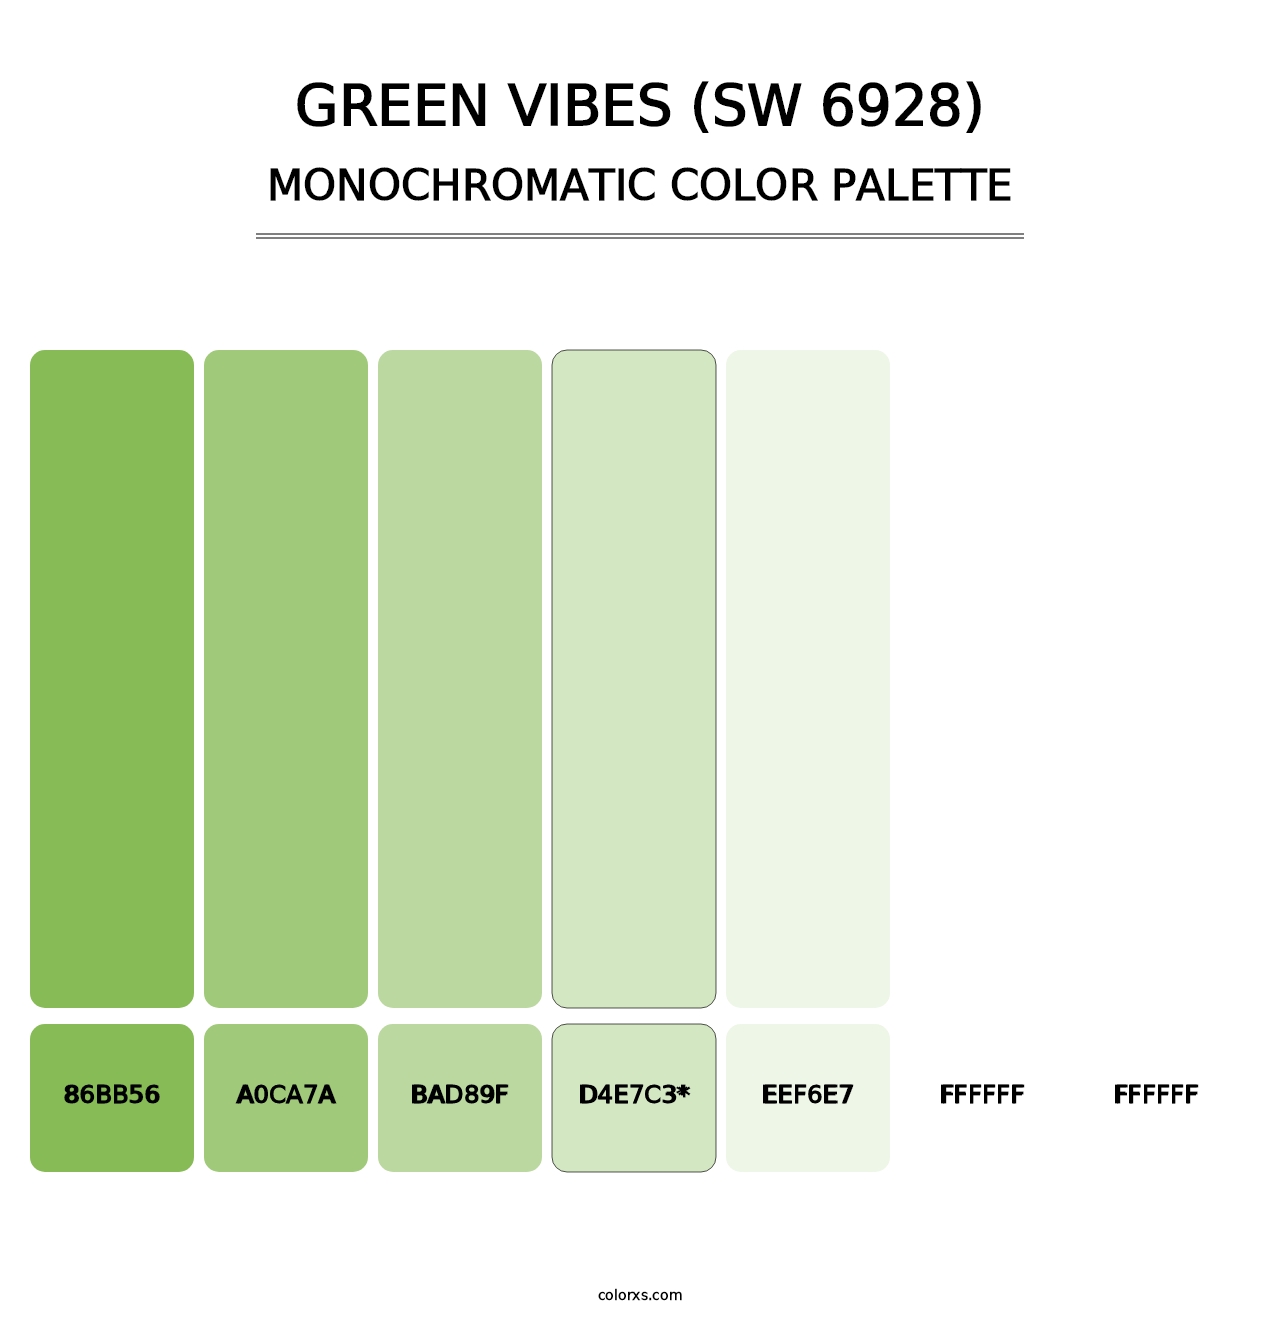 Green Vibes (SW 6928) - Monochromatic Color Palette